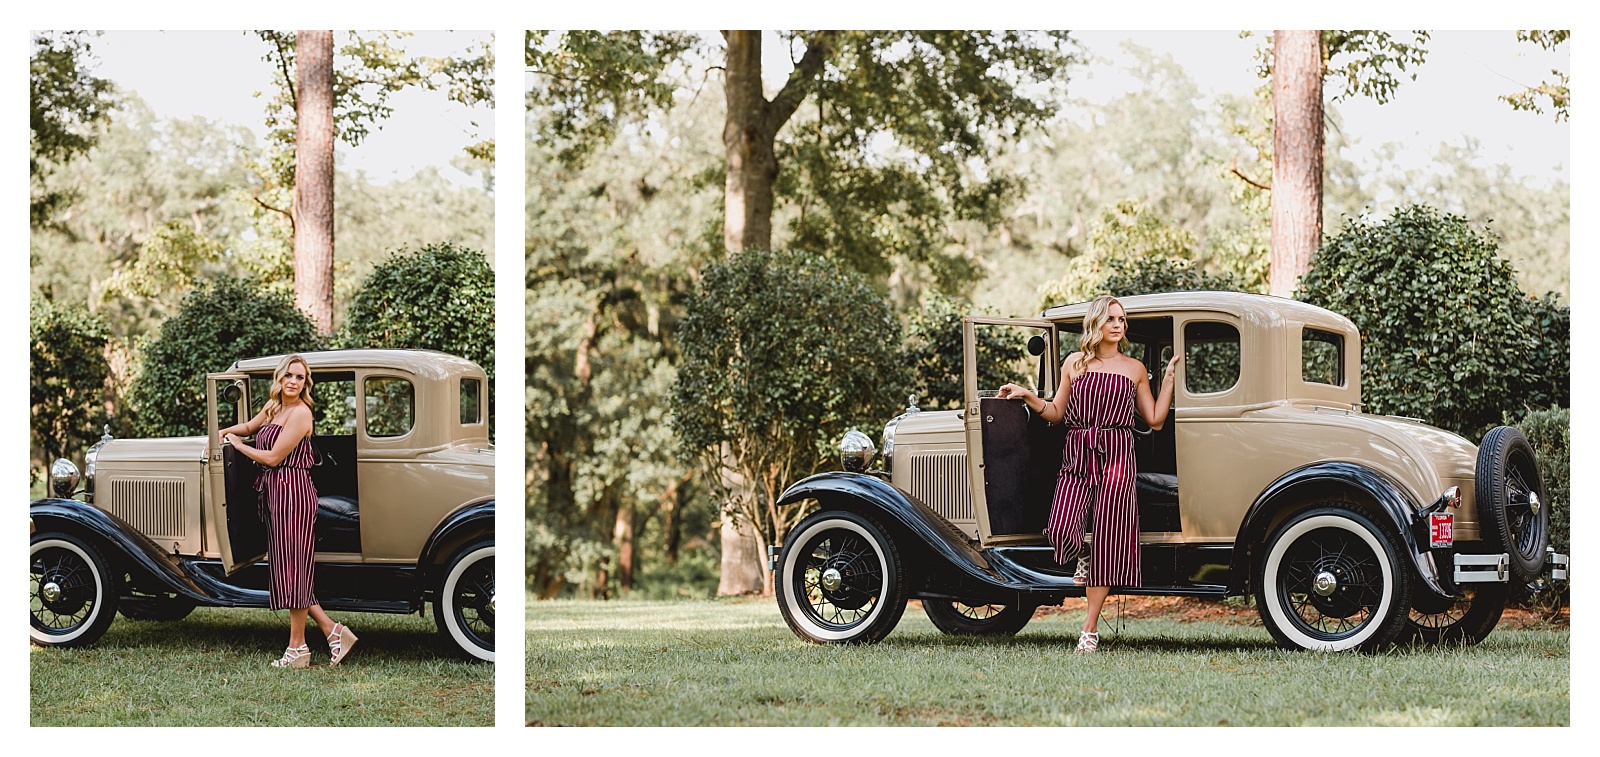 Vintage car senior photography in Florida by Shelly Williams Photography